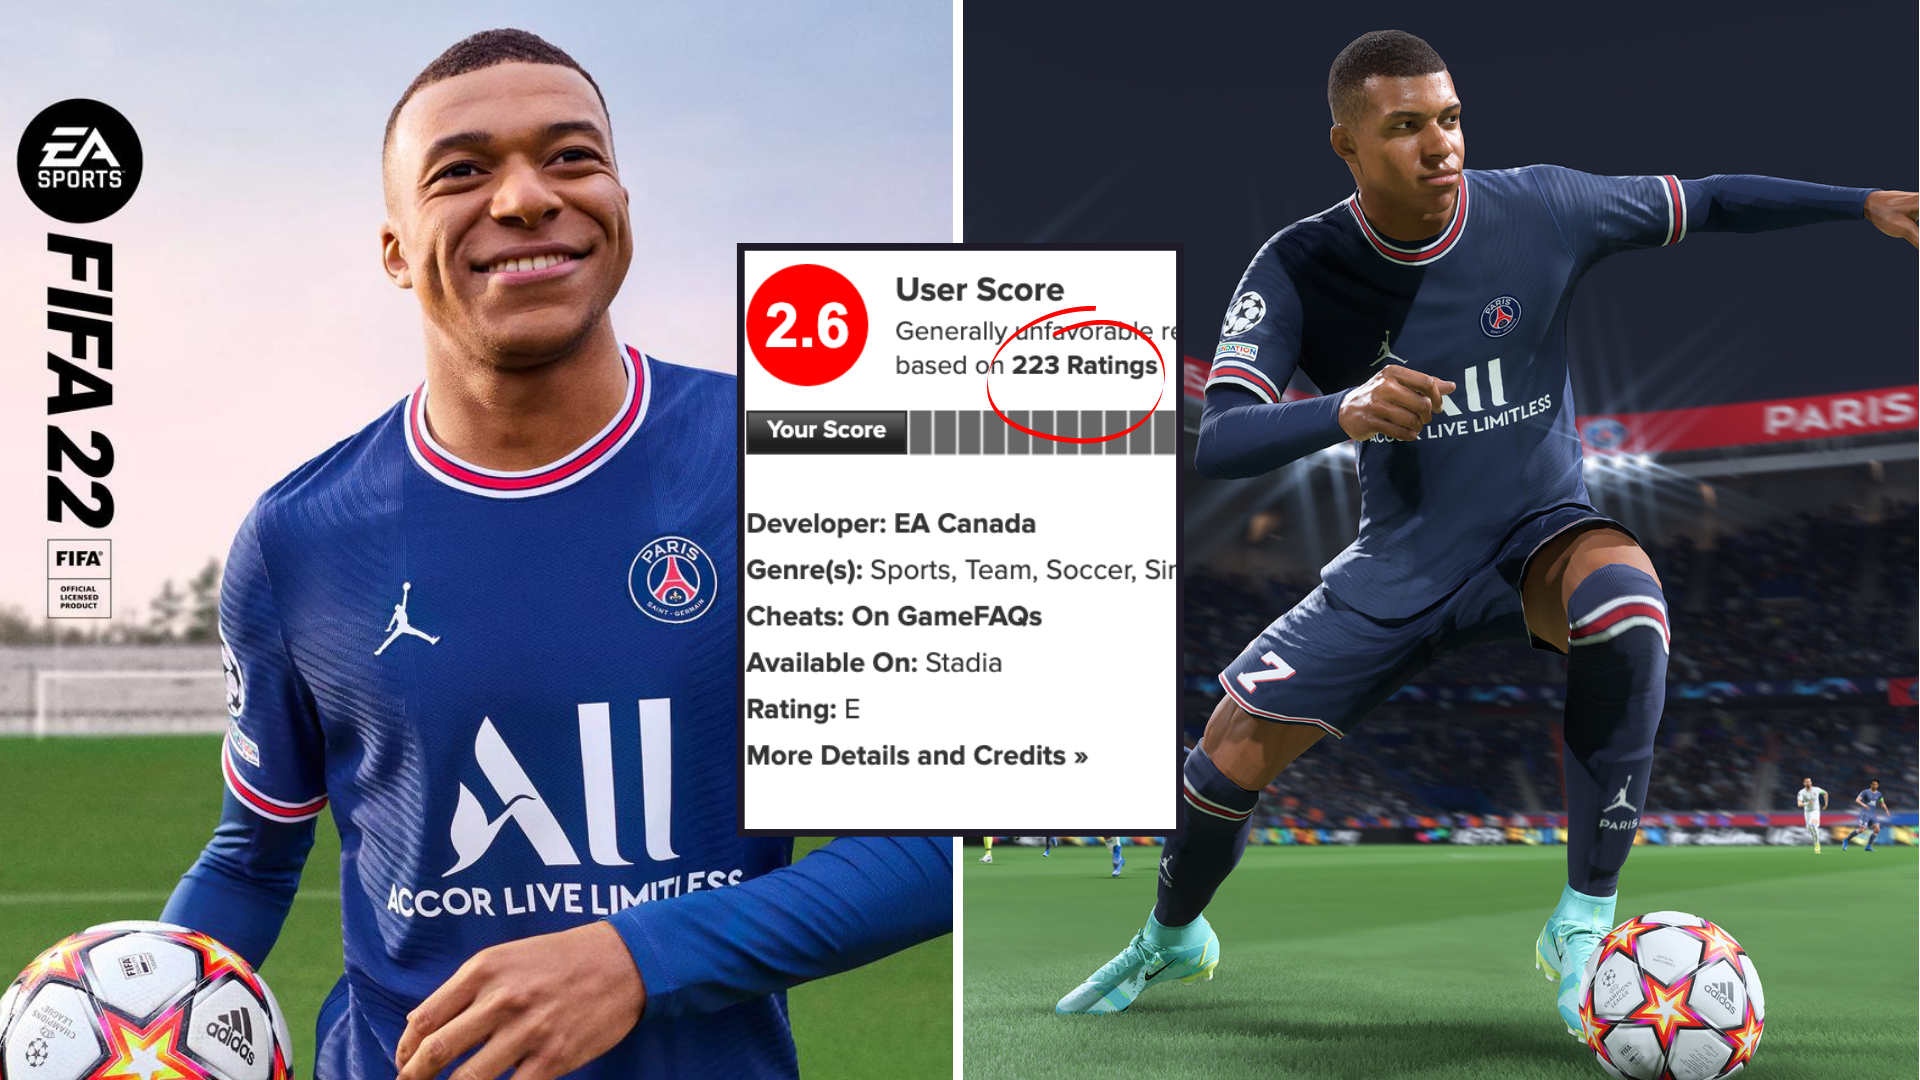 FIFA 21 is currently rated a terrible 0.8/10 on Metacritic